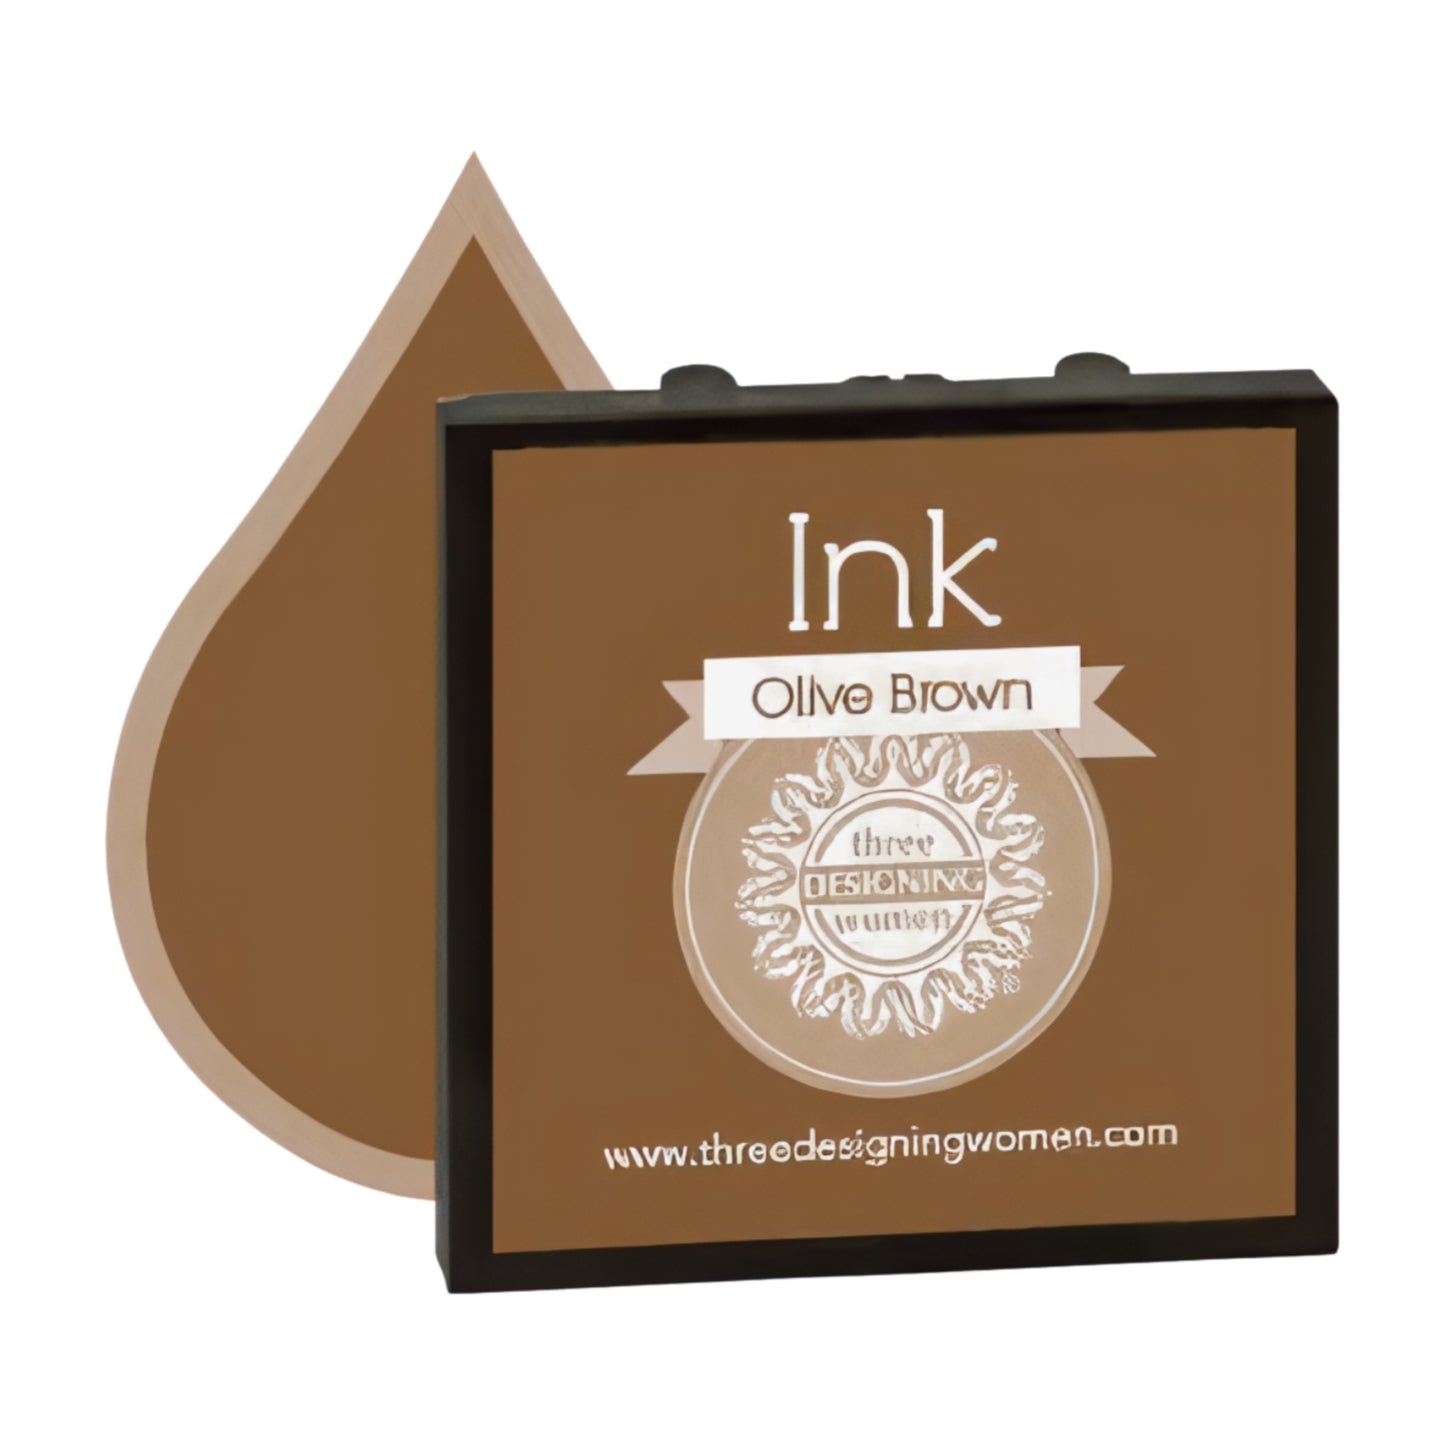 Ink Replacement Cartridge "Olive Brown" for Self-Inking Stampers Three Designing Women